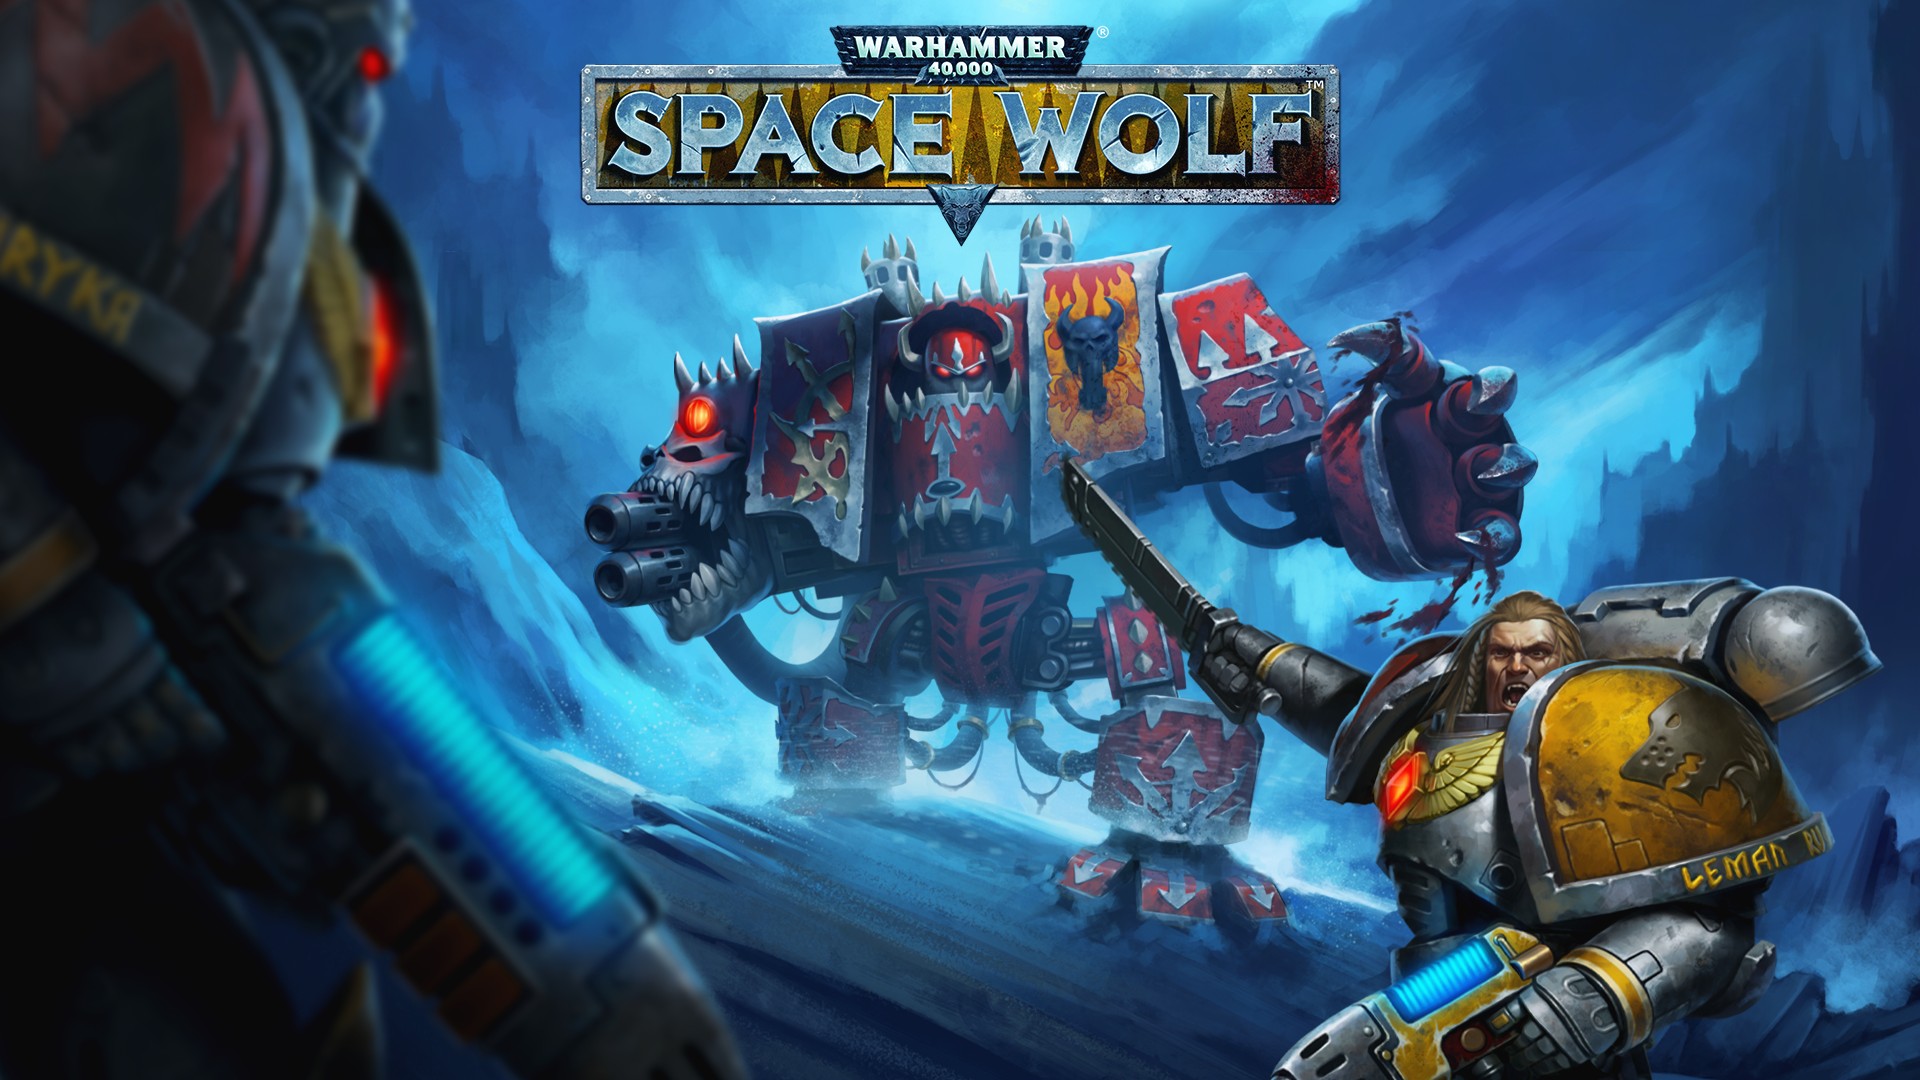 Video For Warhammer 40,000: Space Wolf is Available Now on Xbox One and Xbox Series X|S